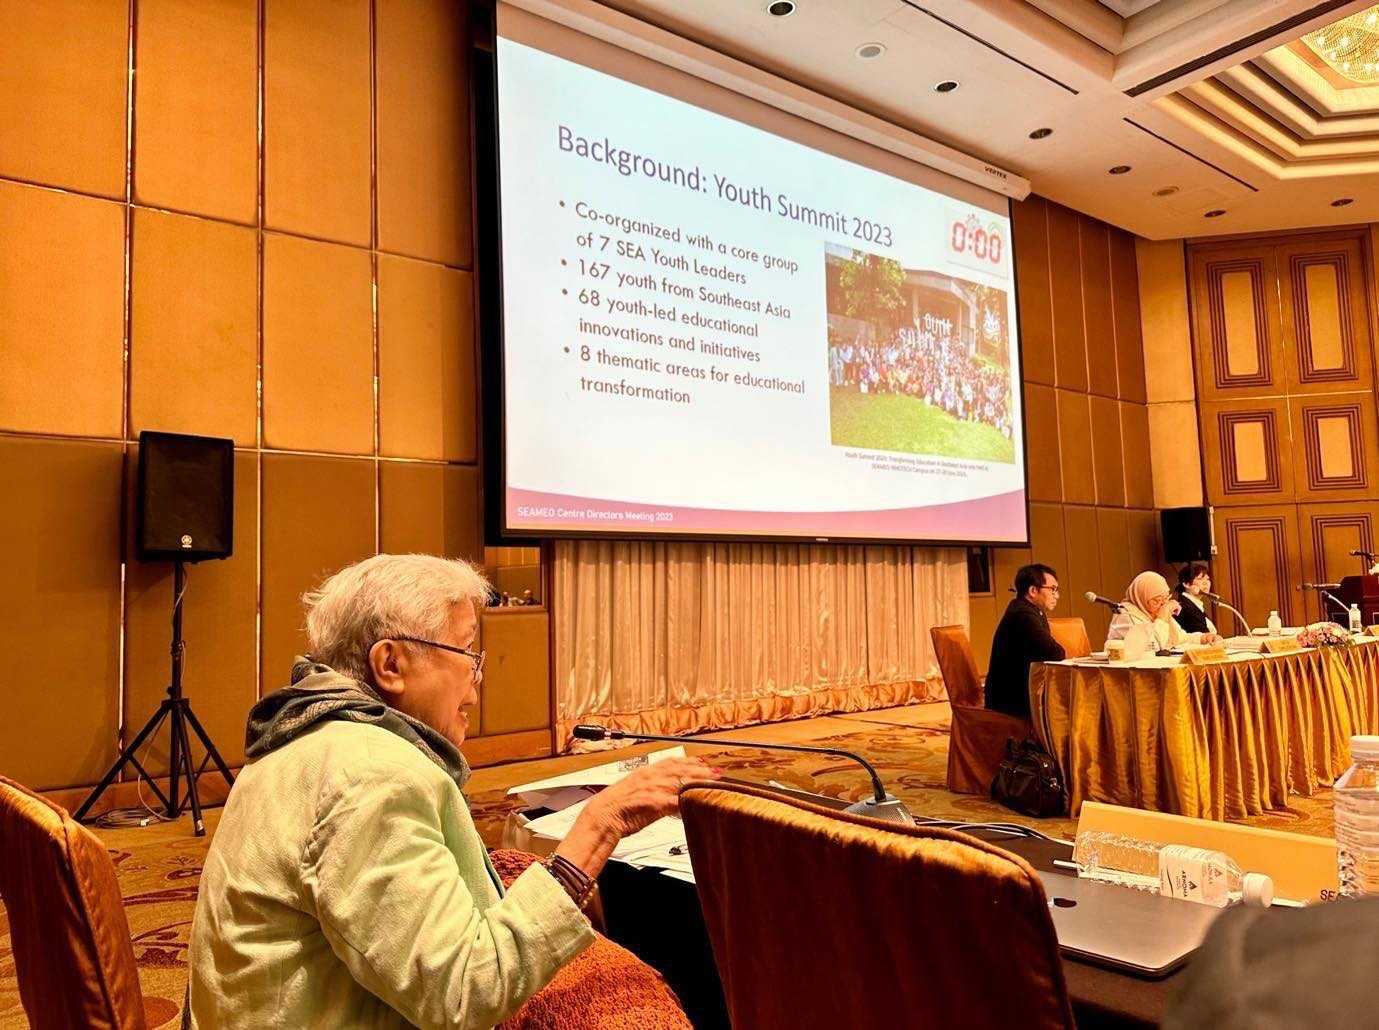 Ex-DepEd Sec. Briones presents youth concerns to regional centers, international organizations in Thailand